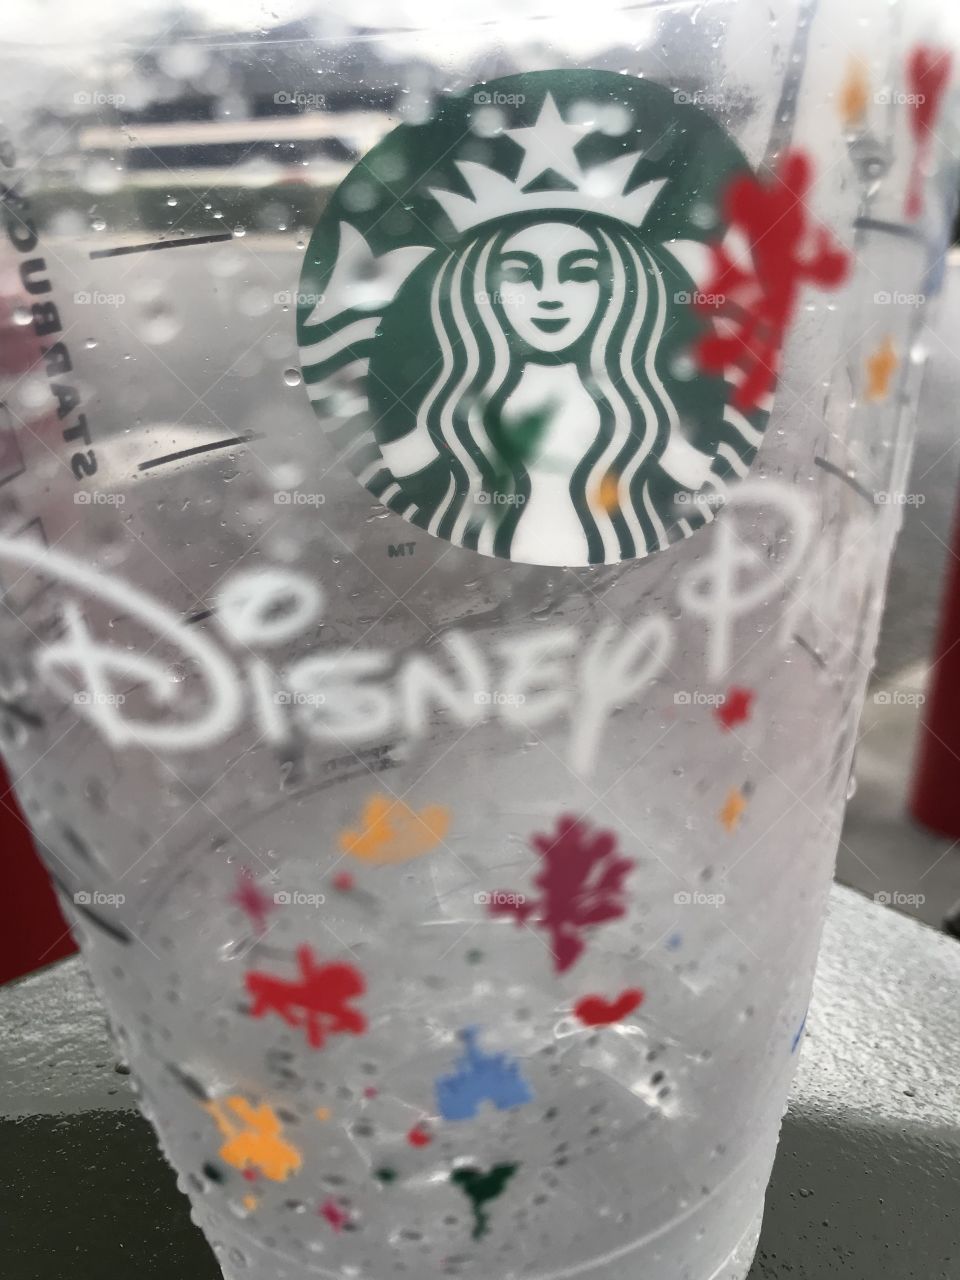 #day72 Everyday Disney World in Orlando Florida.  I have been lost on Disney Properties consecutively since 4/3/19!  You can find it on https://www.facebook.com/selsa.susanna or on IG SelsaCamacho YT SelsaSusanna • Magic Kingdom 6/13/19 Thursday